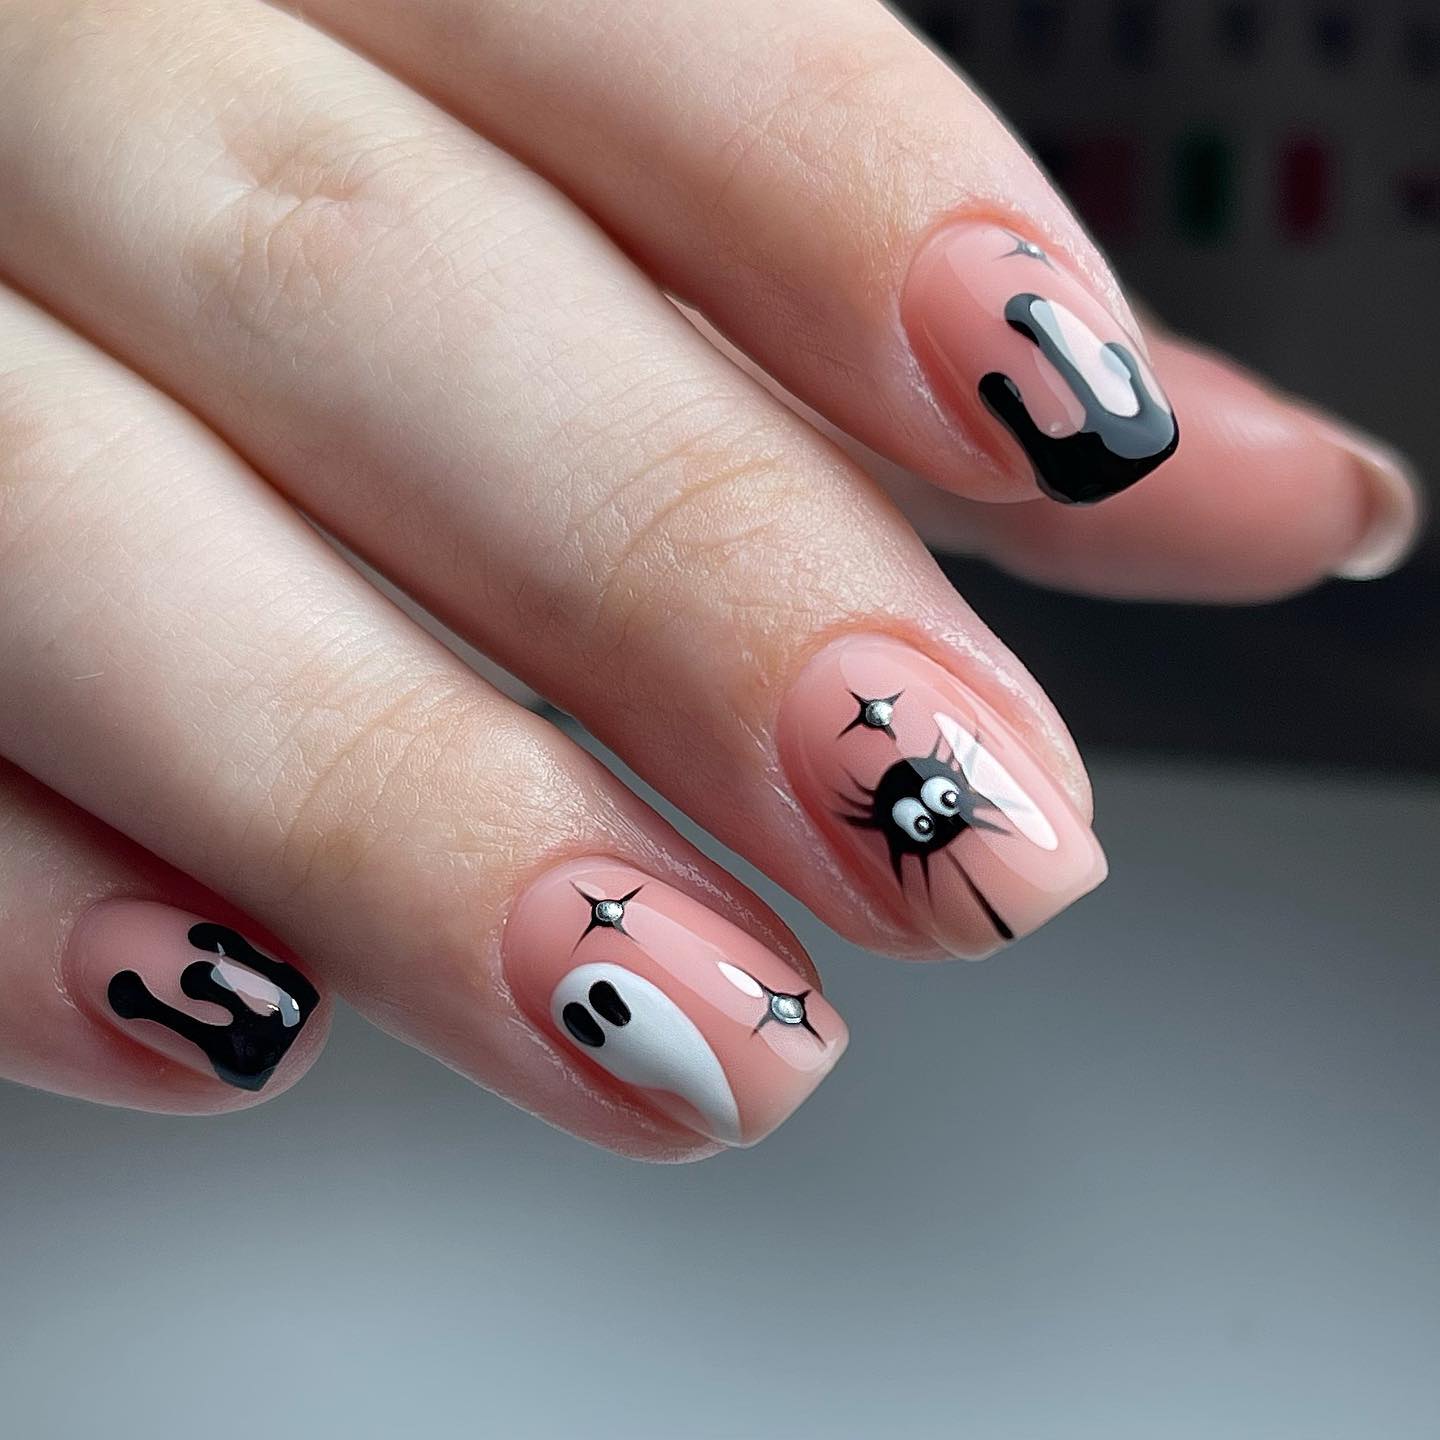 50+ Cute Short Nail Designs You’ll Want To Try Today images 13